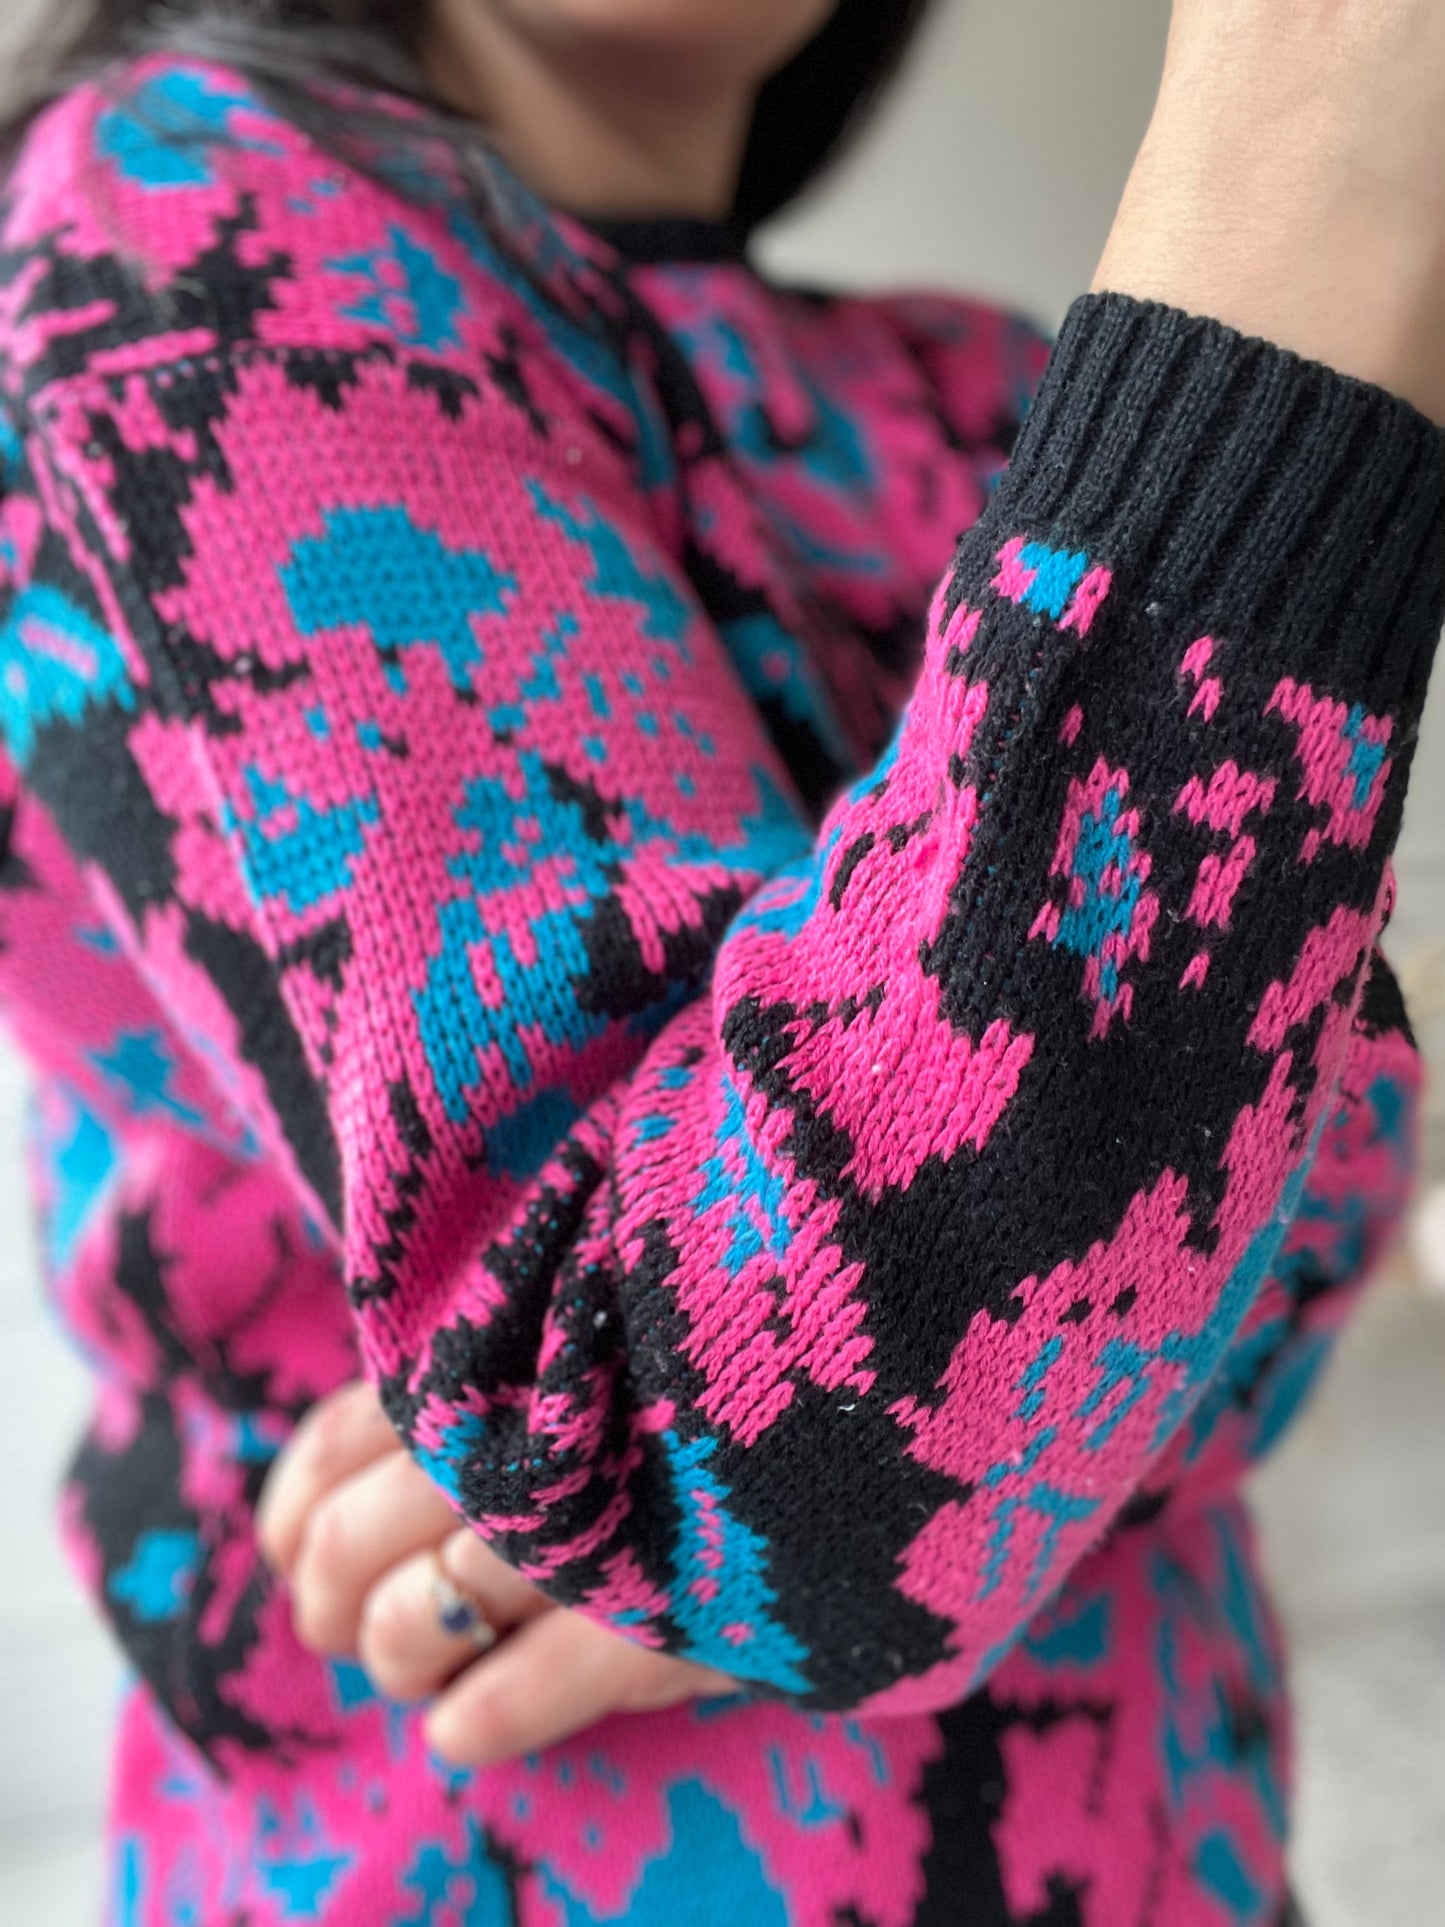 Hot Pink Abstract Knit - Size S/M